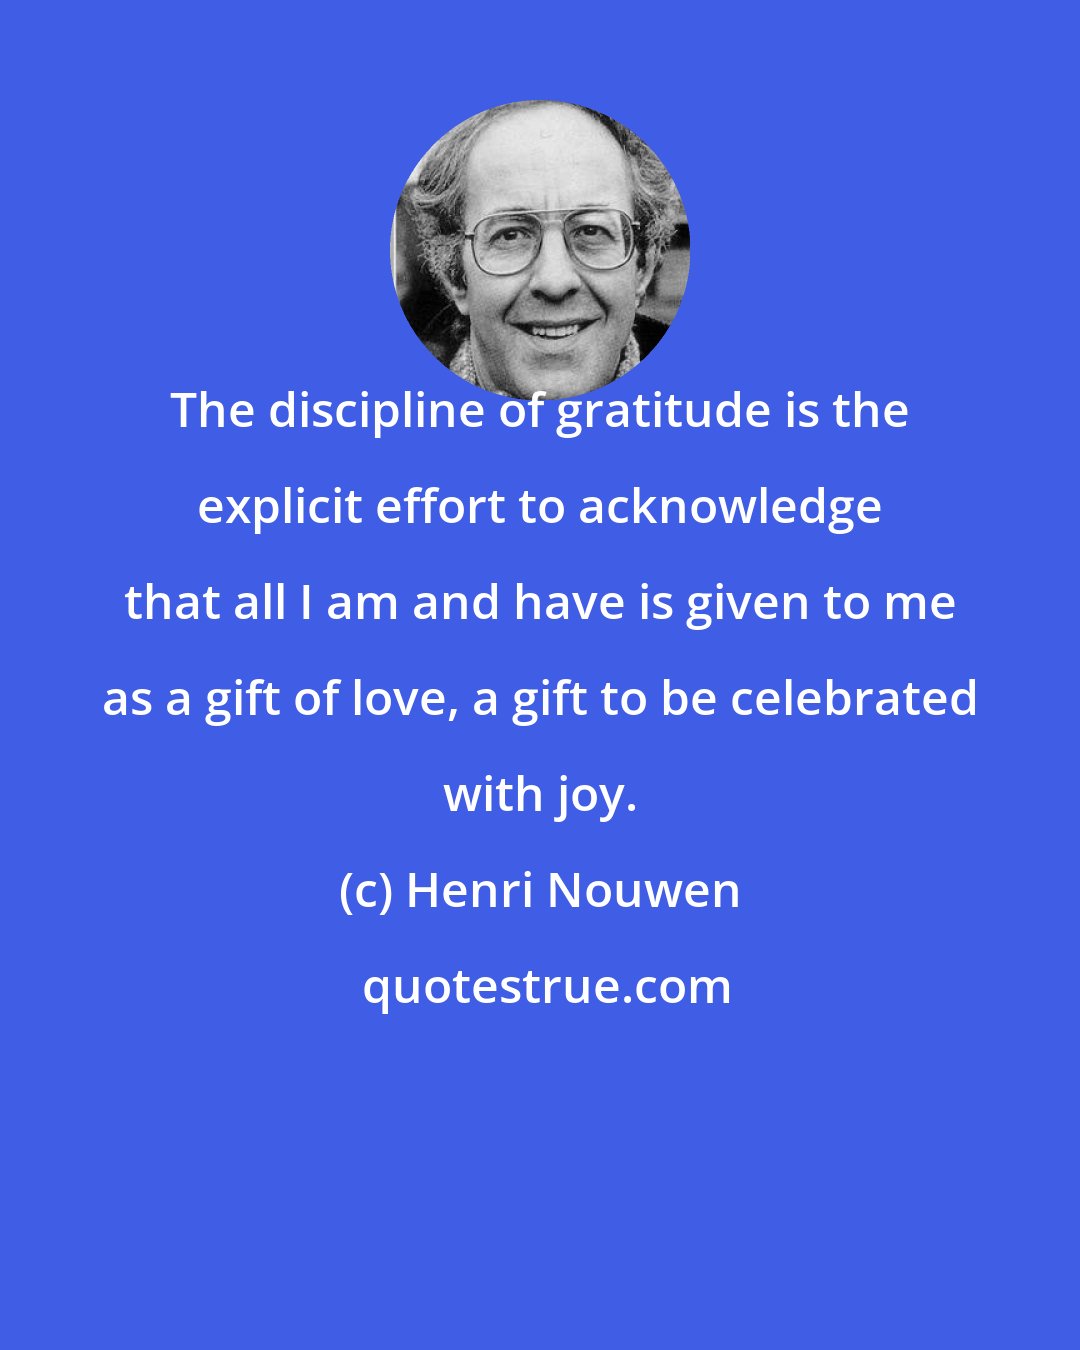 Henri Nouwen: The discipline of gratitude is the explicit effort to acknowledge that all I am and have is given to me as a gift of love, a gift to be celebrated with joy.